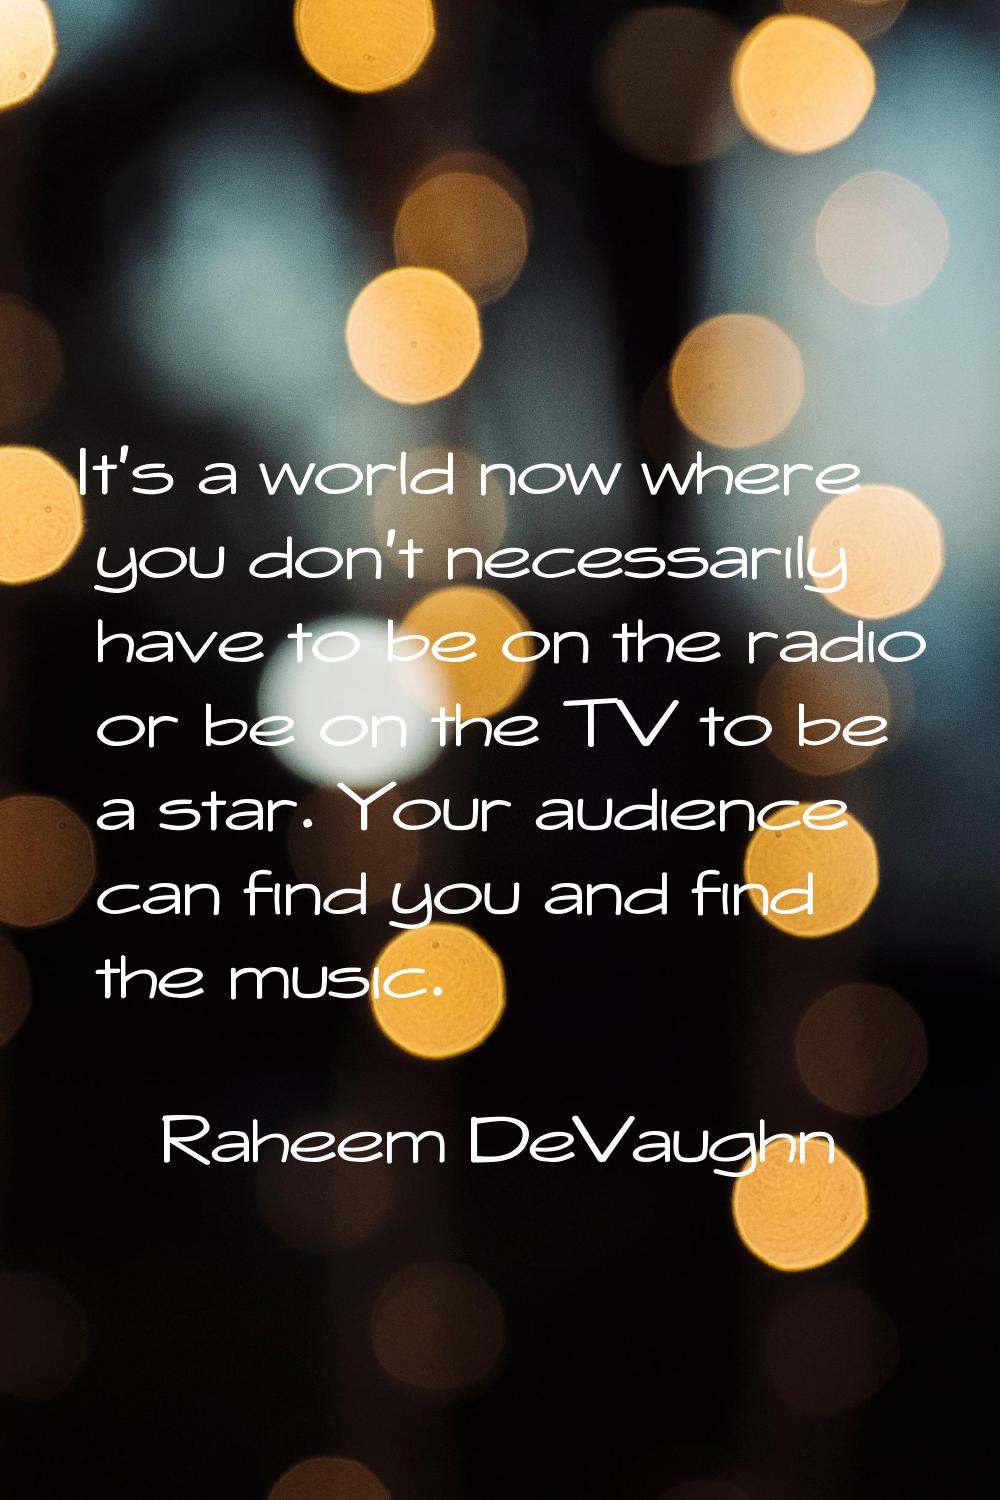 It's a world now where you don't necessarily have to be on the radio or be on the TV to be a star. 